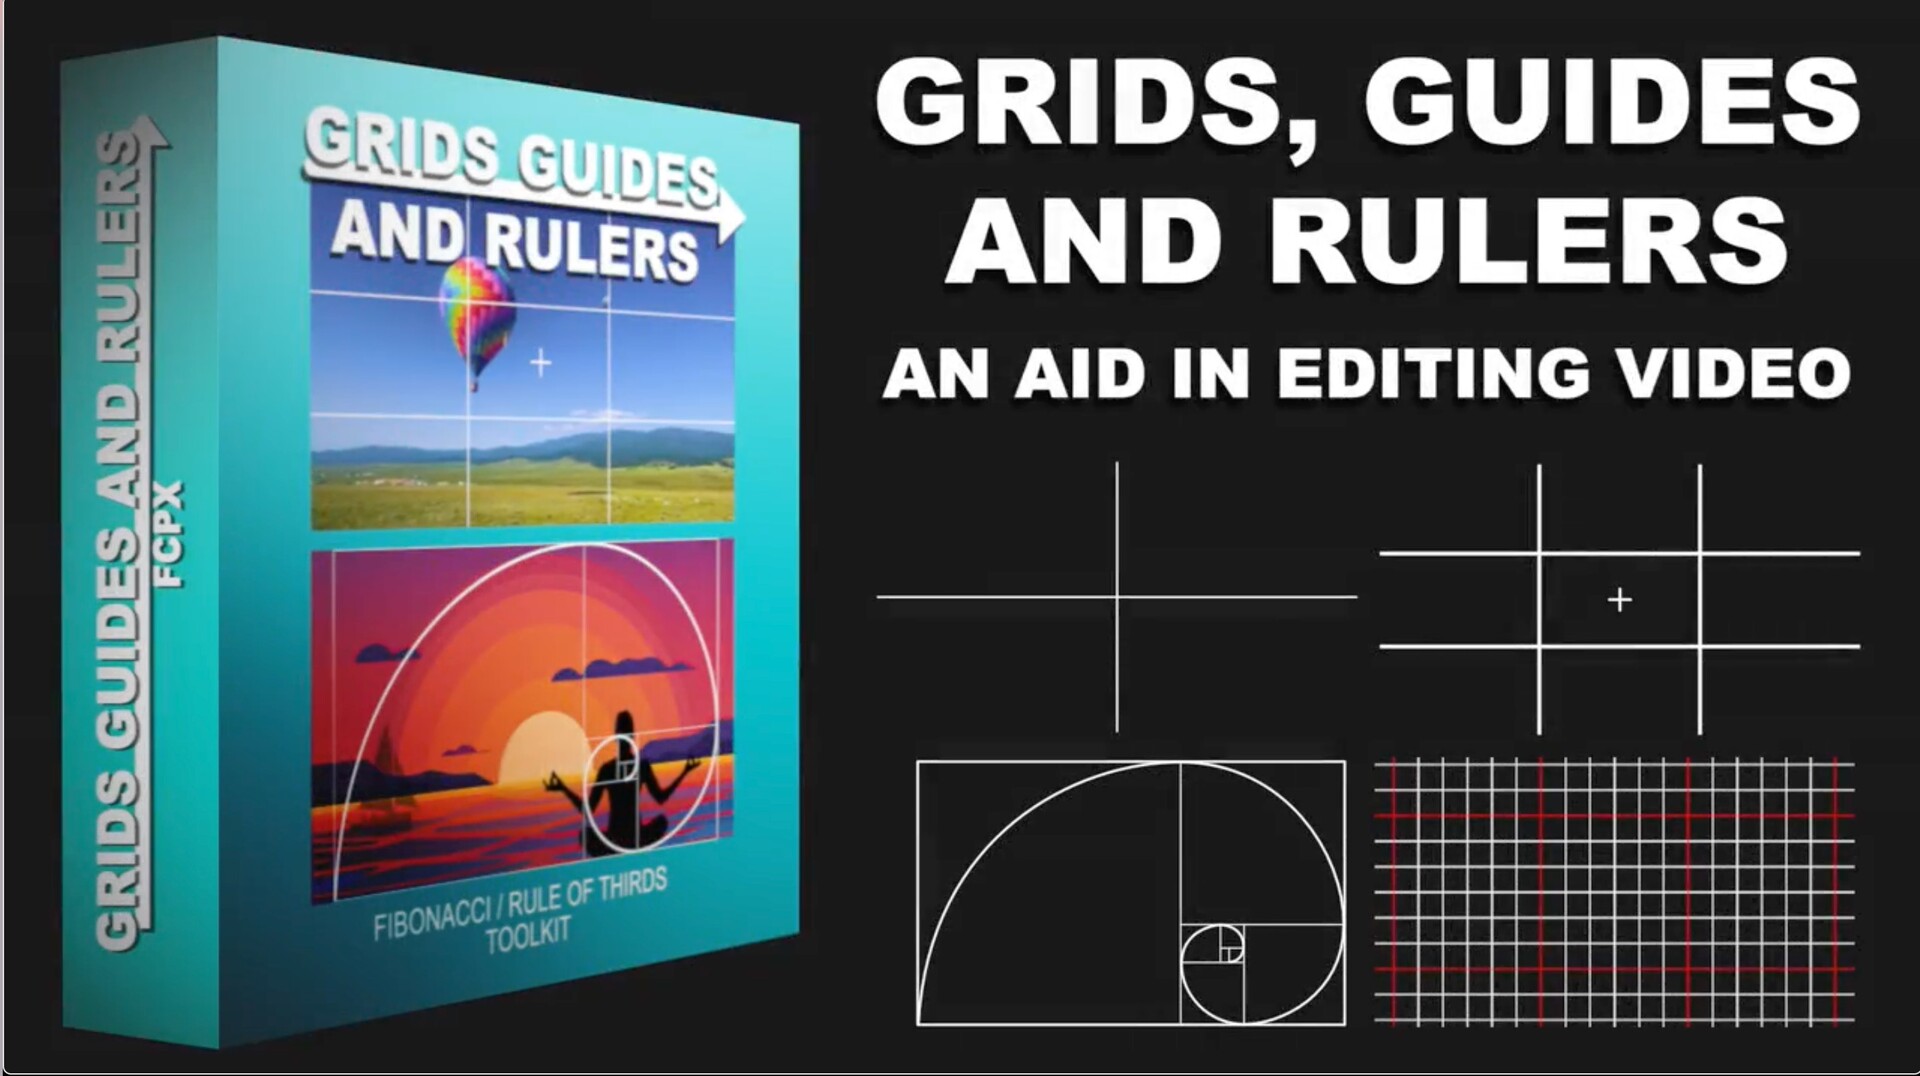 Fcpx插件：15个精美网格指南和标尺模版 Grids Guides And Rulers 